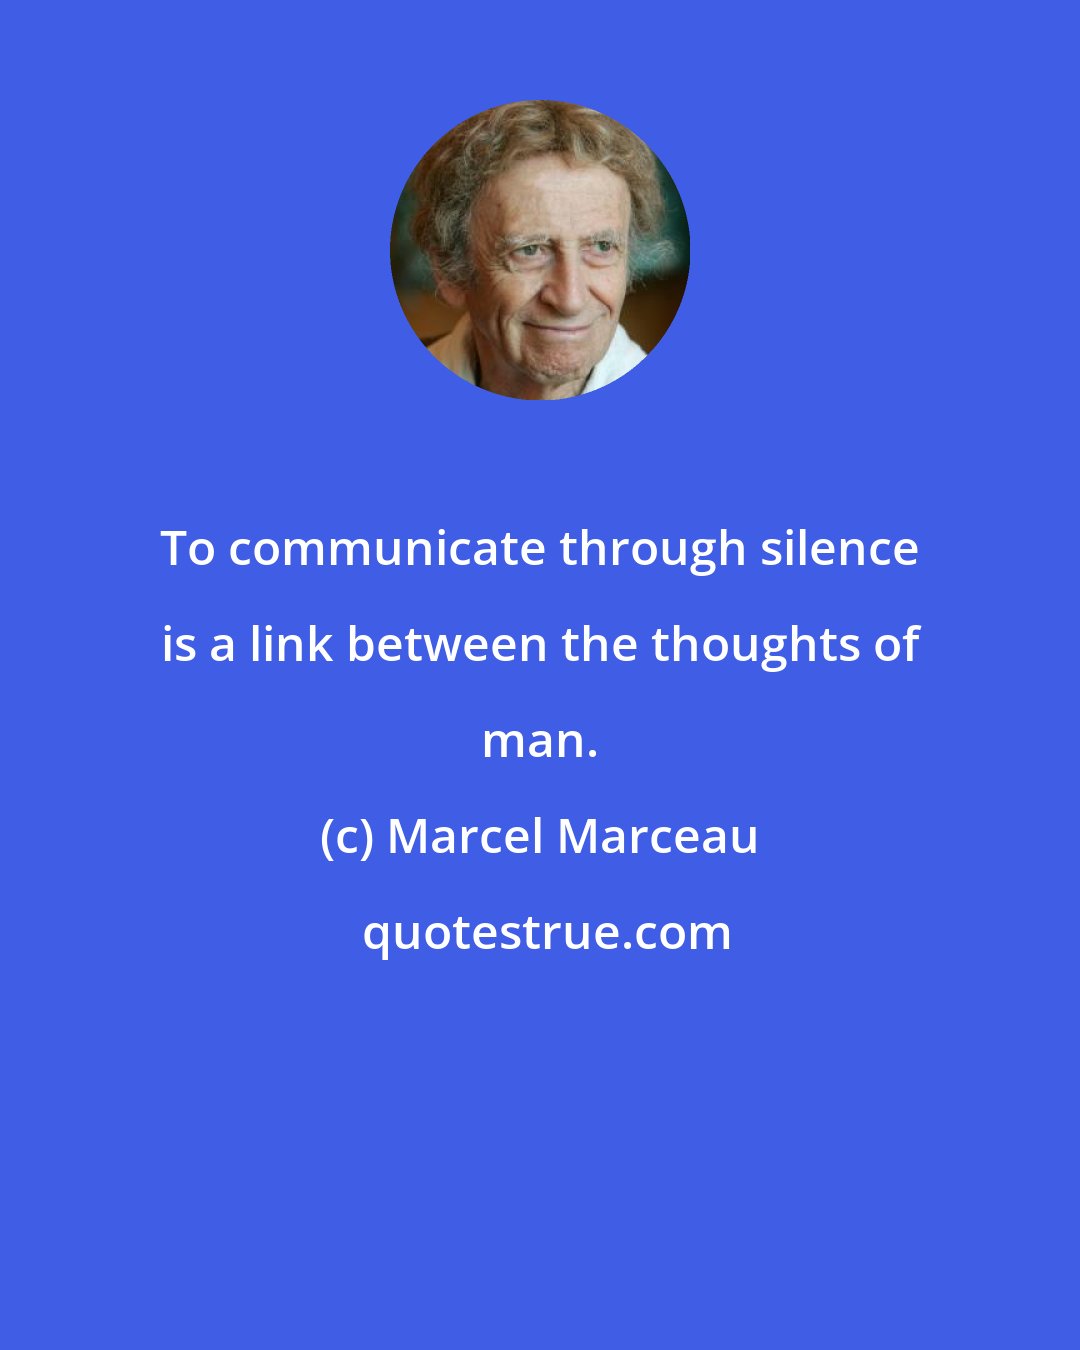 Marcel Marceau: To communicate through silence is a link between the thoughts of man.